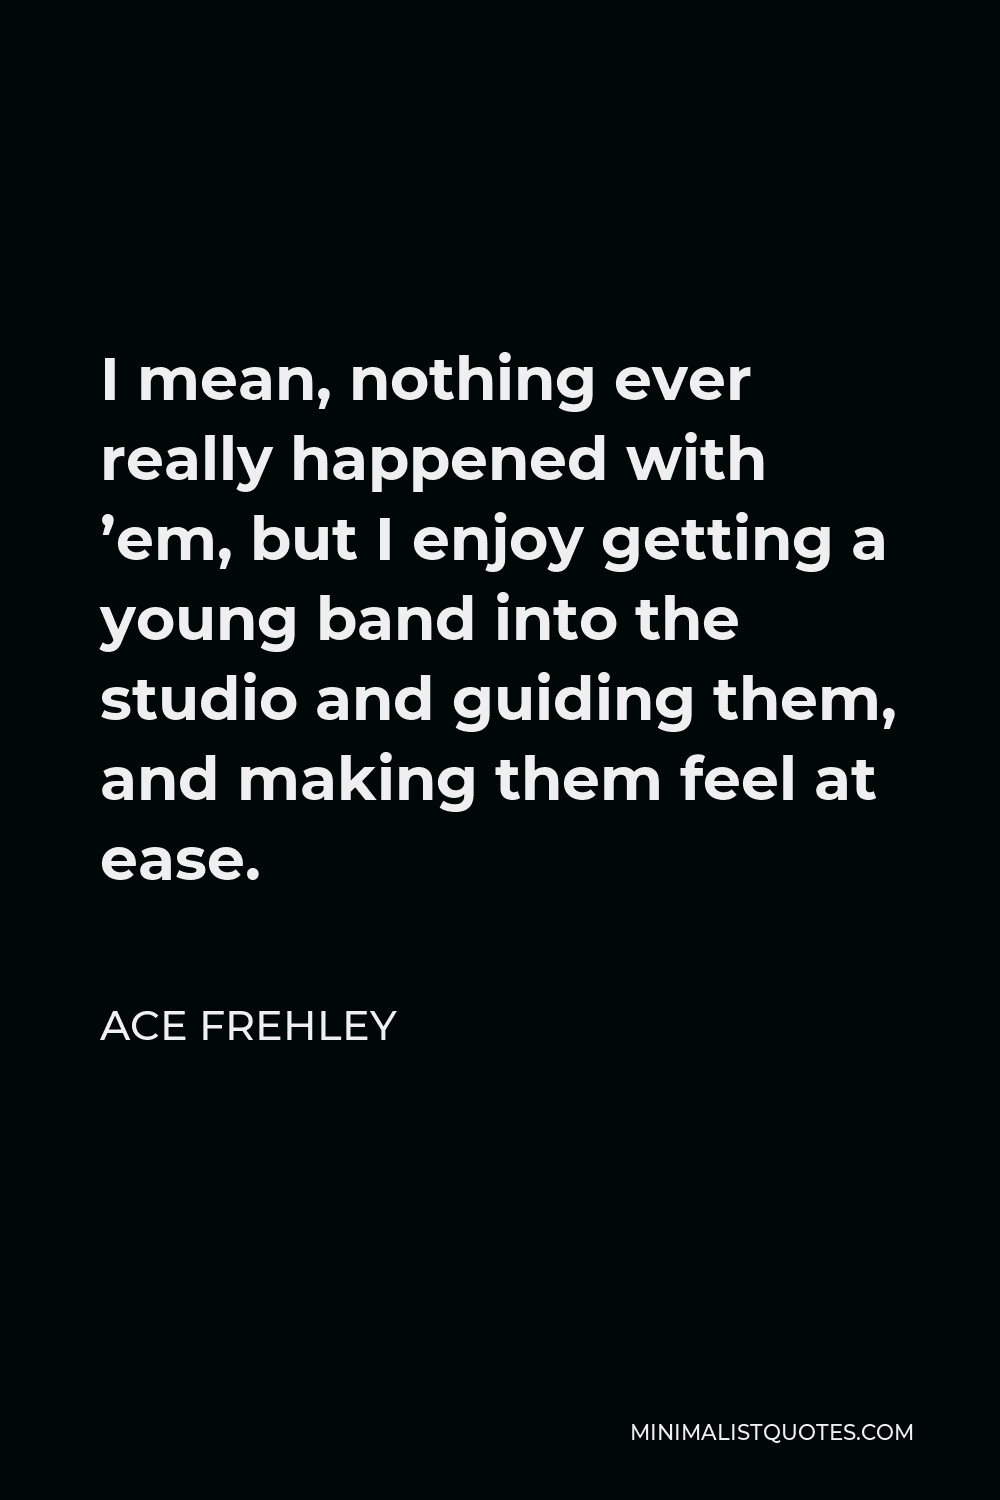 Ace Frehley Quote - I mean, nothing ever really happened with ’em, but I enjoy getting a young band into the studio and guiding them, and making them feel at ease.